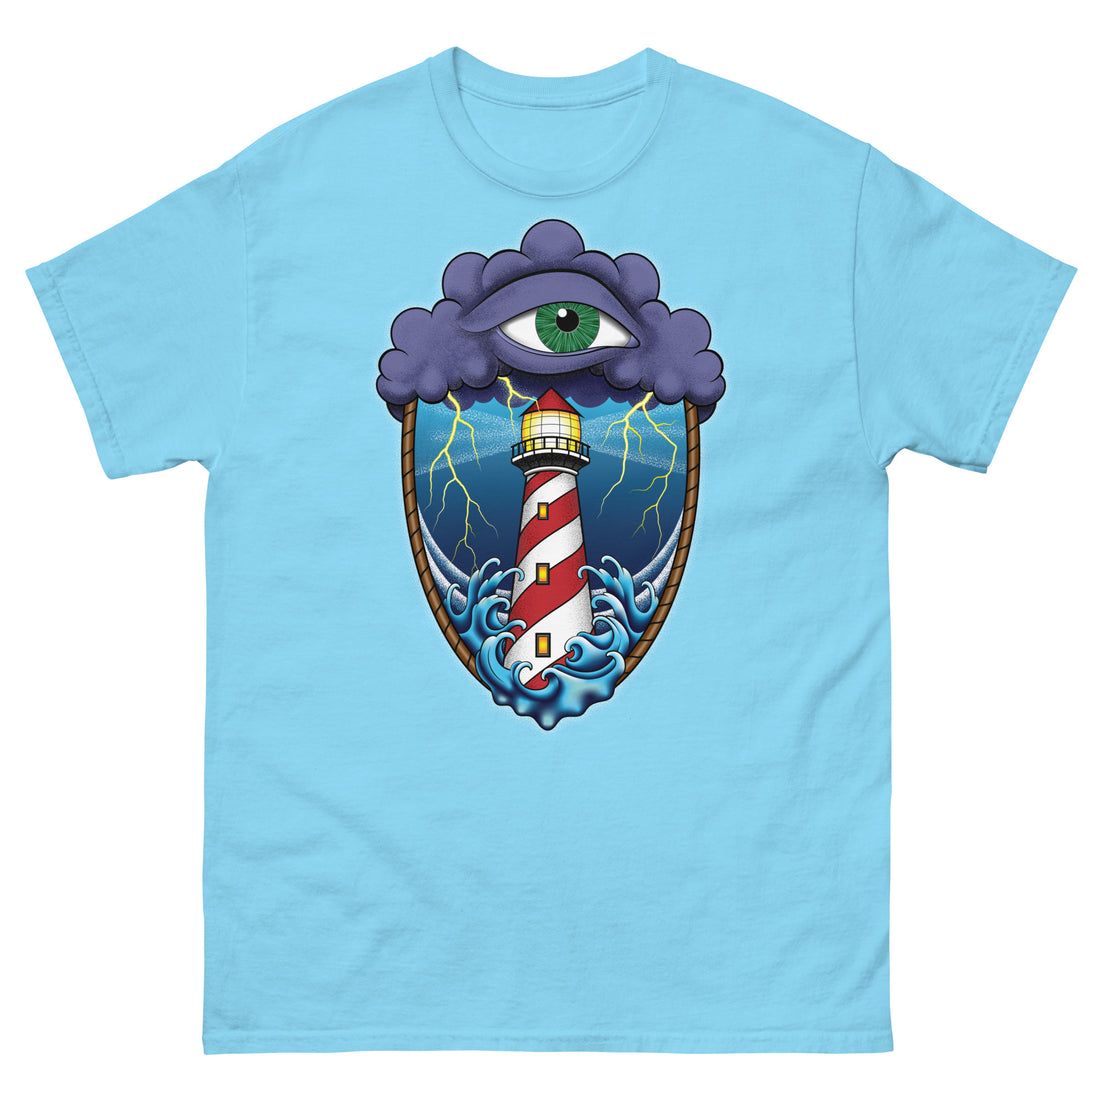 A sky blue t-shirt with an old school eye of the storm tattoo design of large dark purple storm clouds at the top of the design with a green eye in the middle of the clouds.  Below the clouds is an oval shape with brown rope. Inside the rope are stormy seas and a lighthouse with lightning striking in the background.  At the bottom of the design, some of the waves are spilling out of the rope barrier. The sky and seas are hues of blue; the lighthouse is white and red striped like a barber pole.